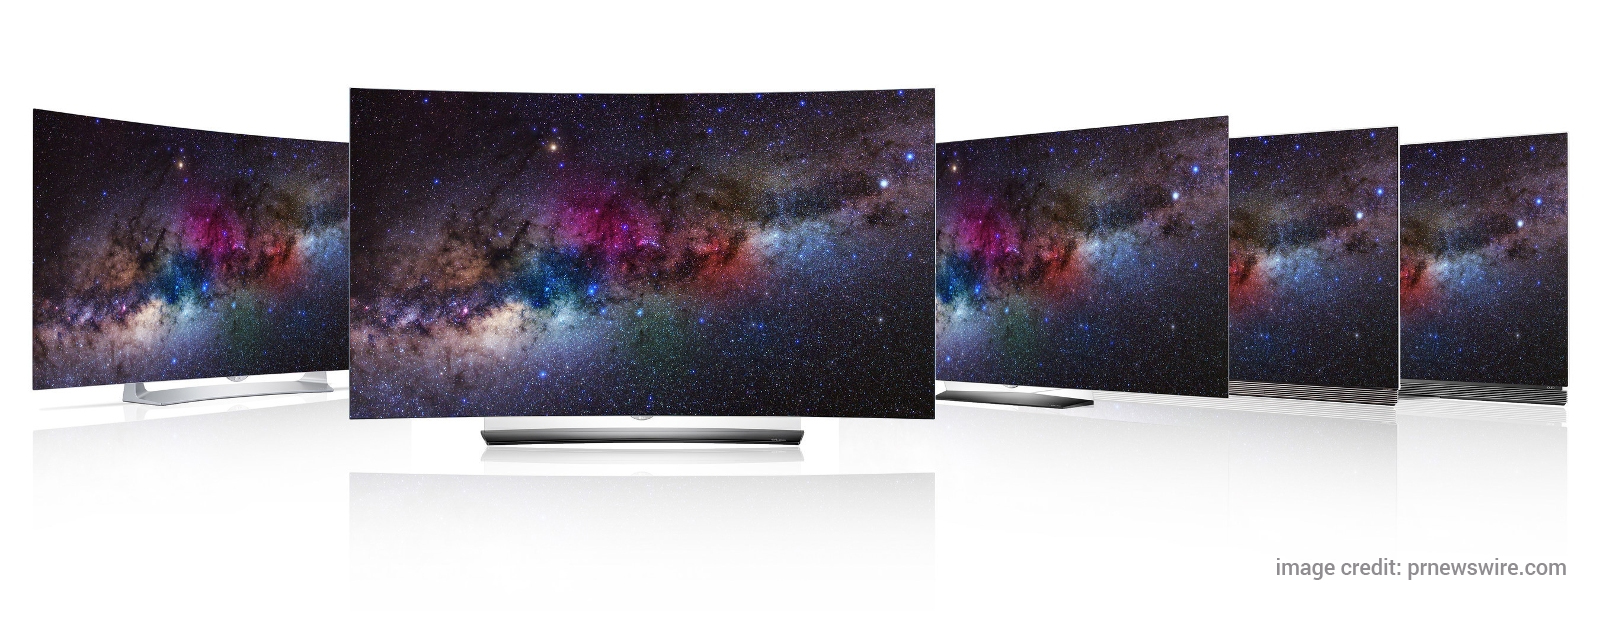 LG launches its OLED TVs' lineup in India for 2017